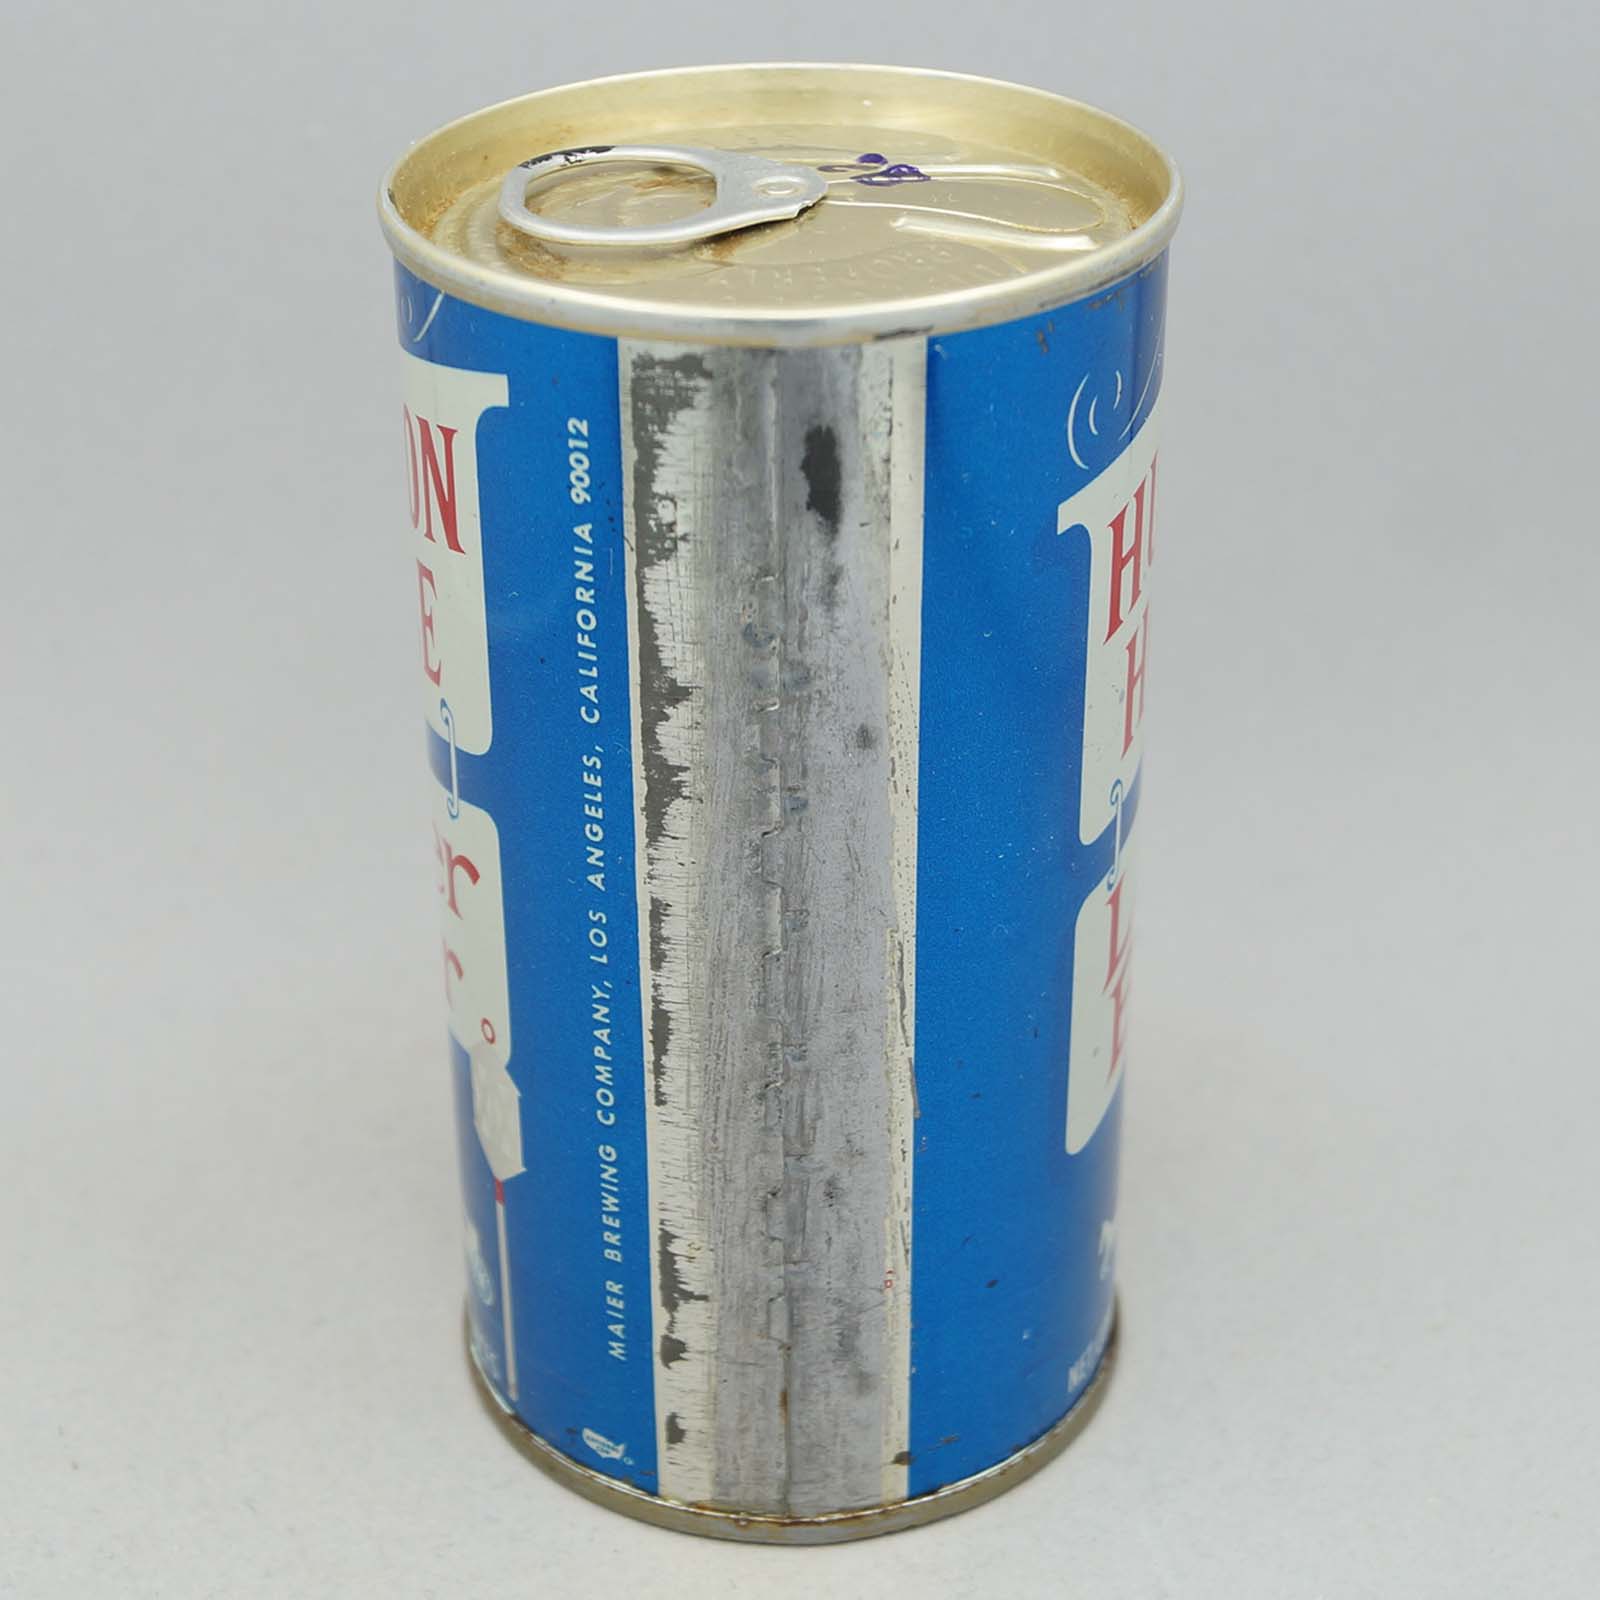 hudson house 78-12 pull tab beer can 4